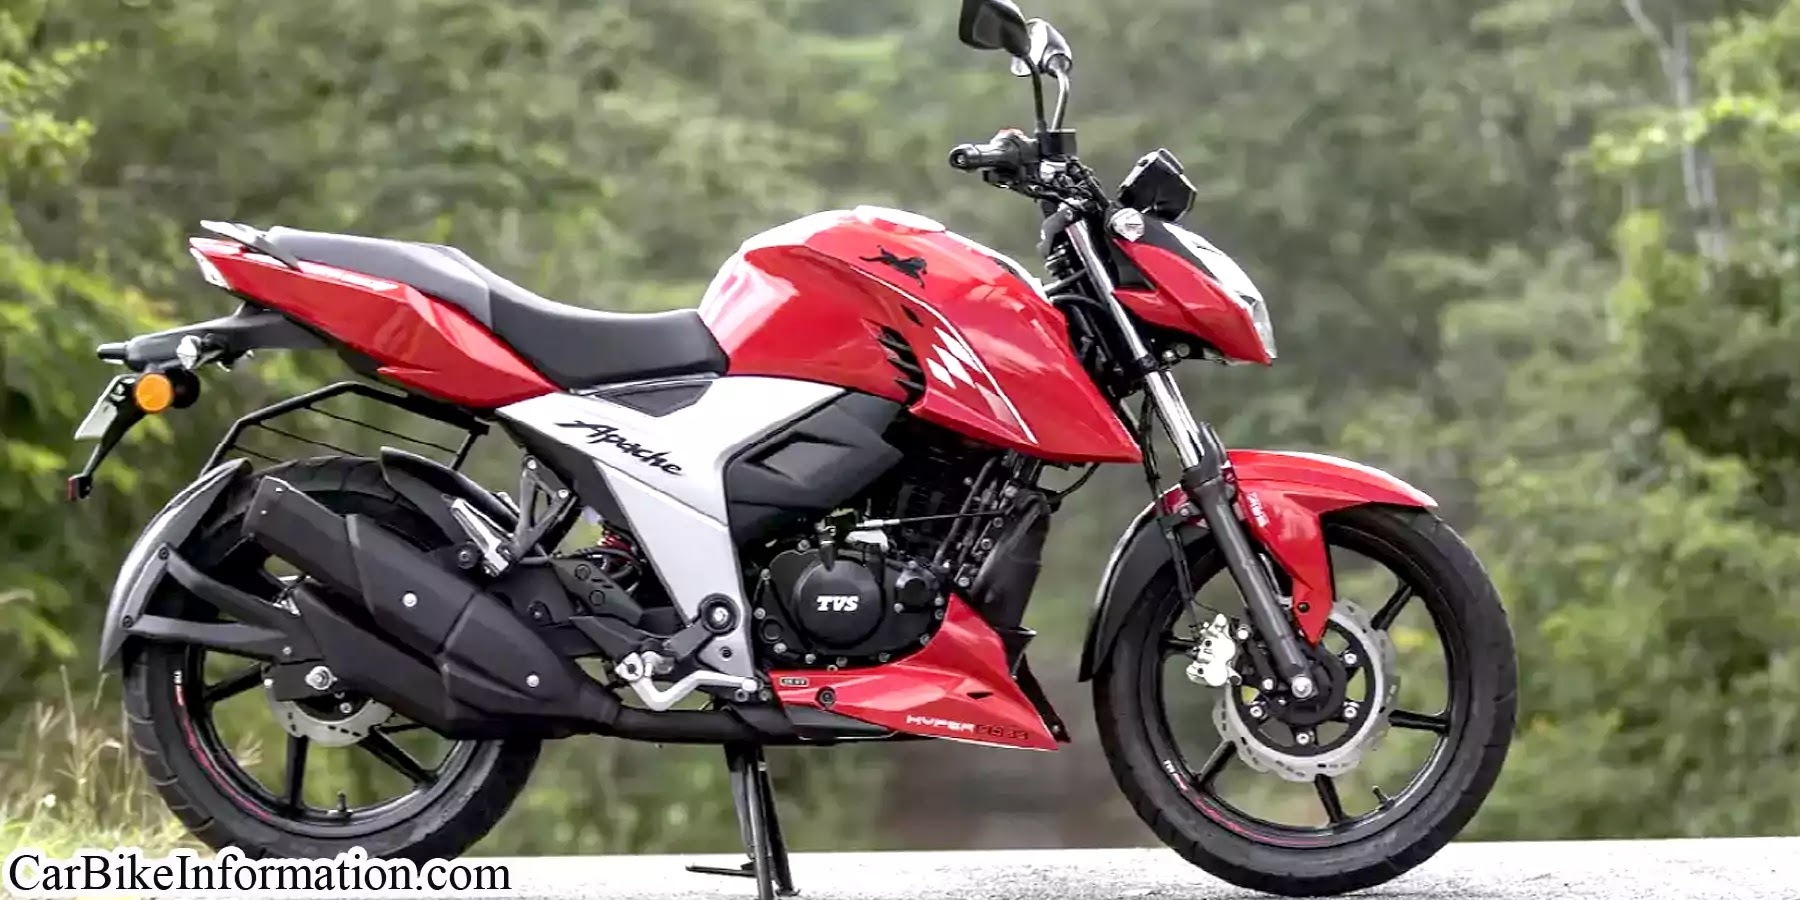 Tvs Apache Rtr 160 4v Review On Road Price Mileage Colour Images Varients Specification And Features